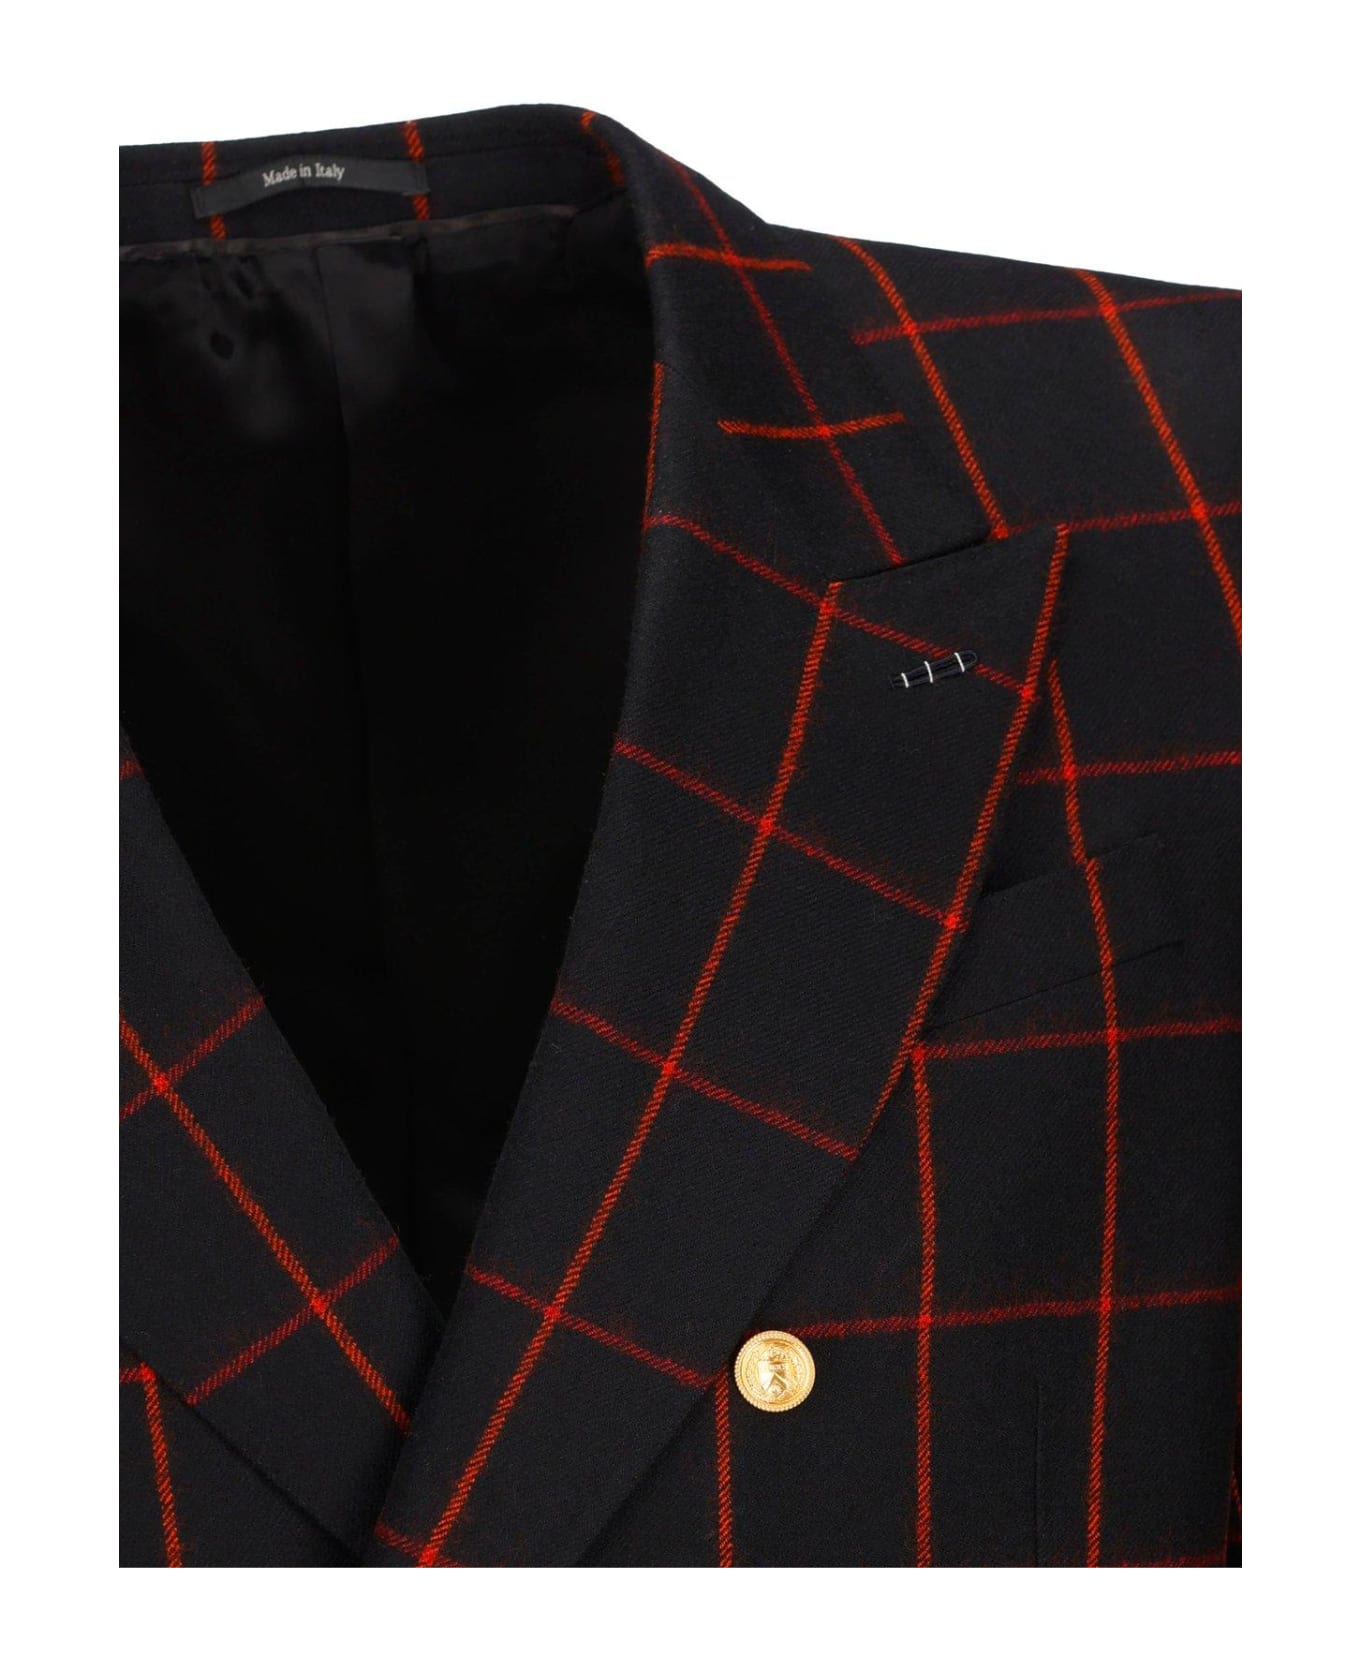 Gucci Checked Double Breasted Jacket